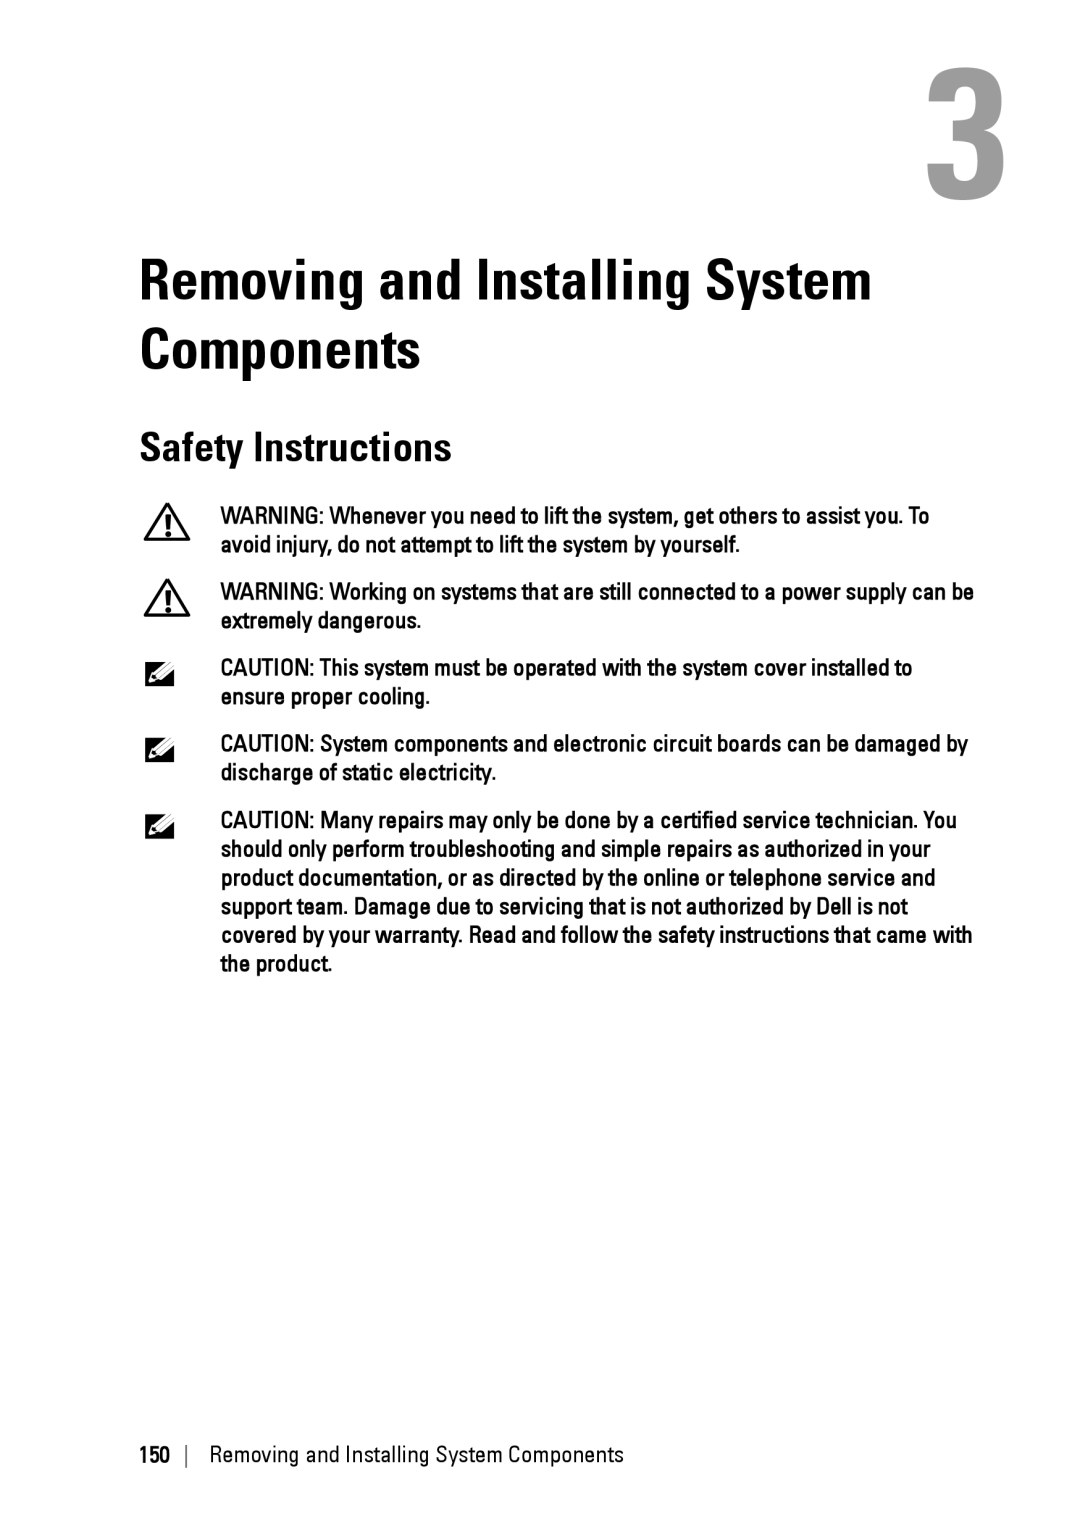 Dell C6220 II owner manual Safety Instructions, Removing and Installing System Components 